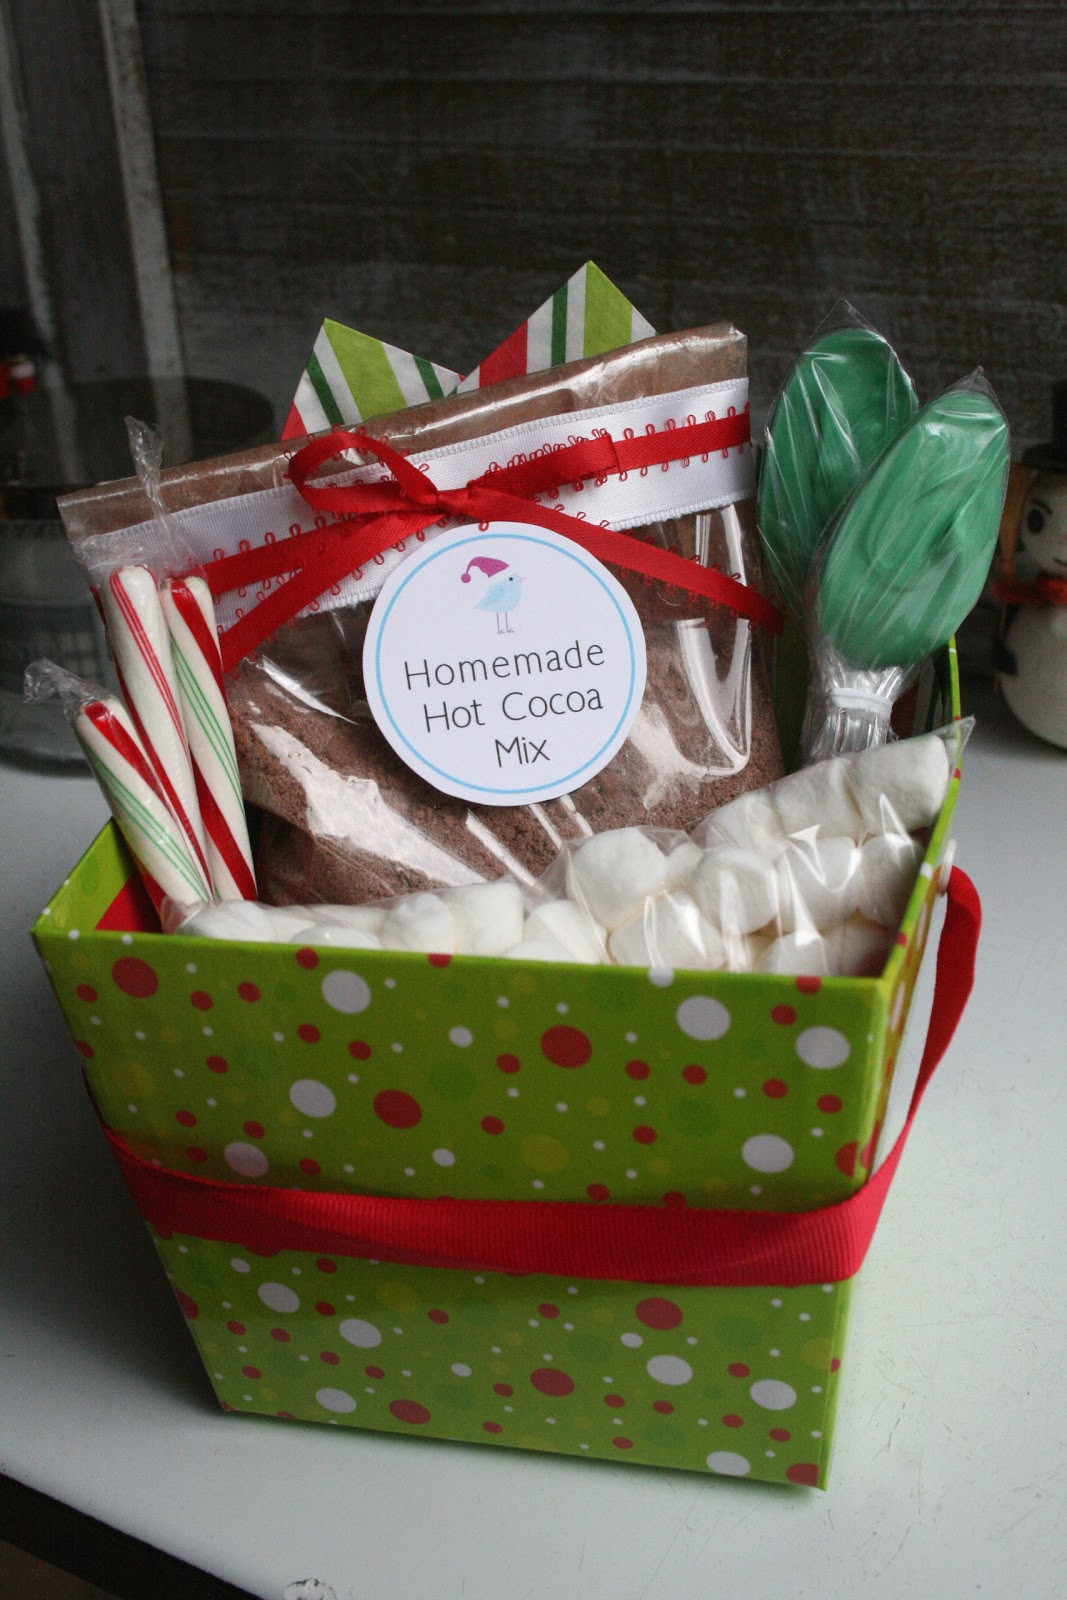 Homemade Gift Ideas For Christmas
 The Nesting Corral Homemade Christmas Gifts Hot Cocoa